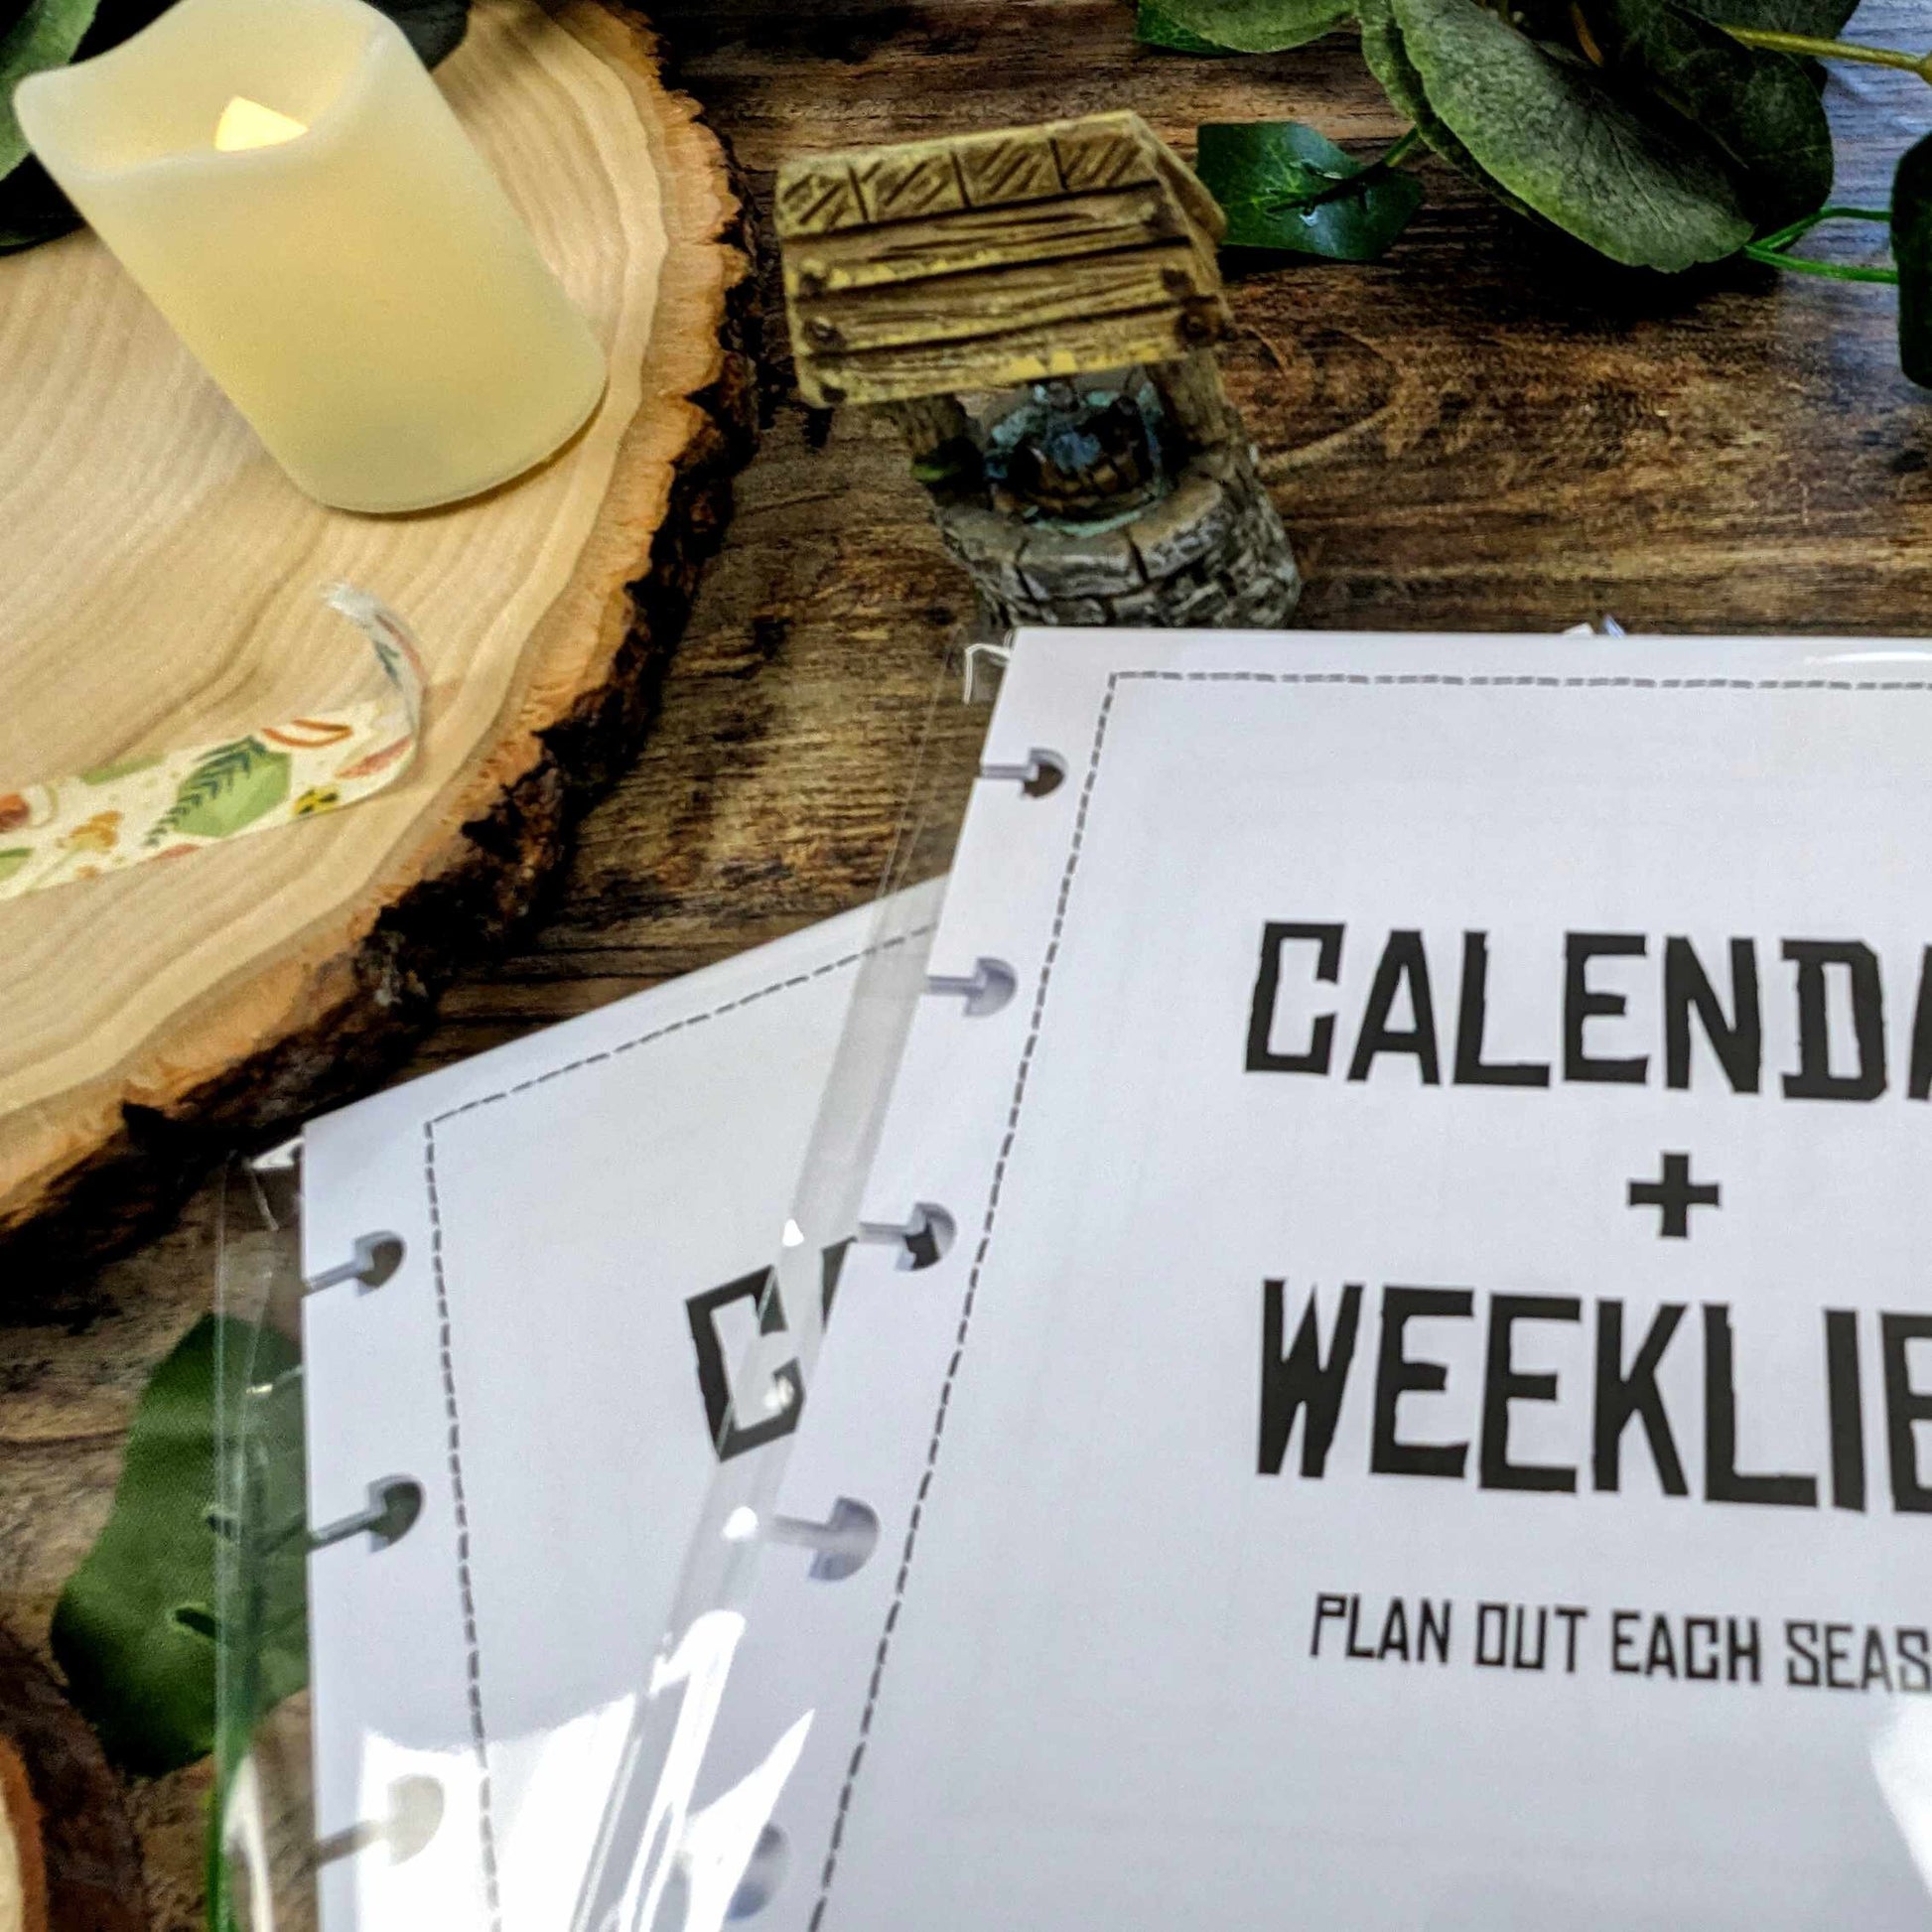 Calendar and Weeklies For Farm Sim Game Notebook | Gaming Notebook Discbound